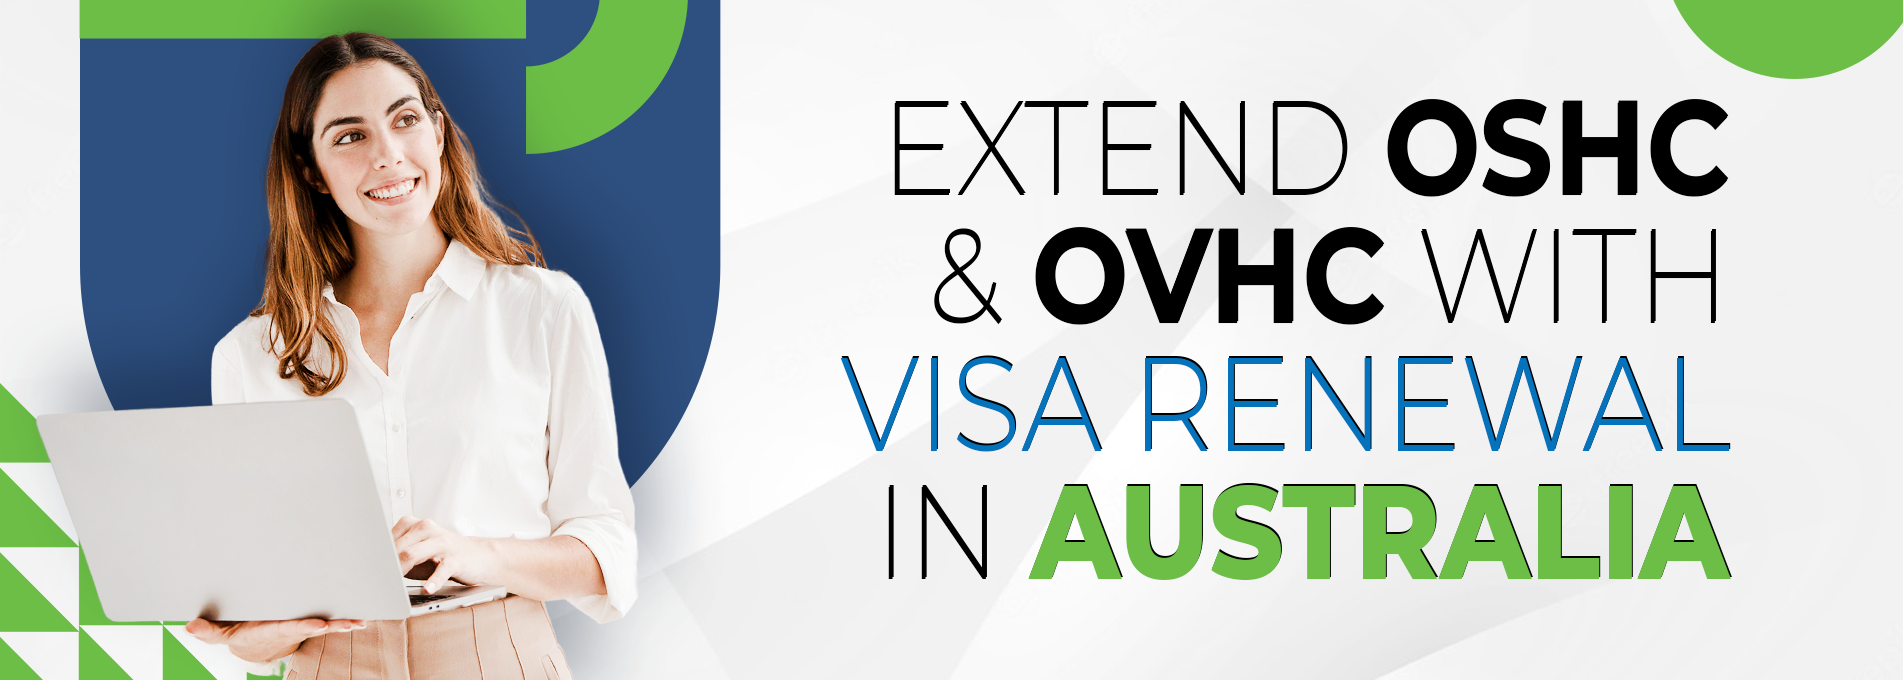 Extend OSHC and OVHC with Visa Renewal in Australia